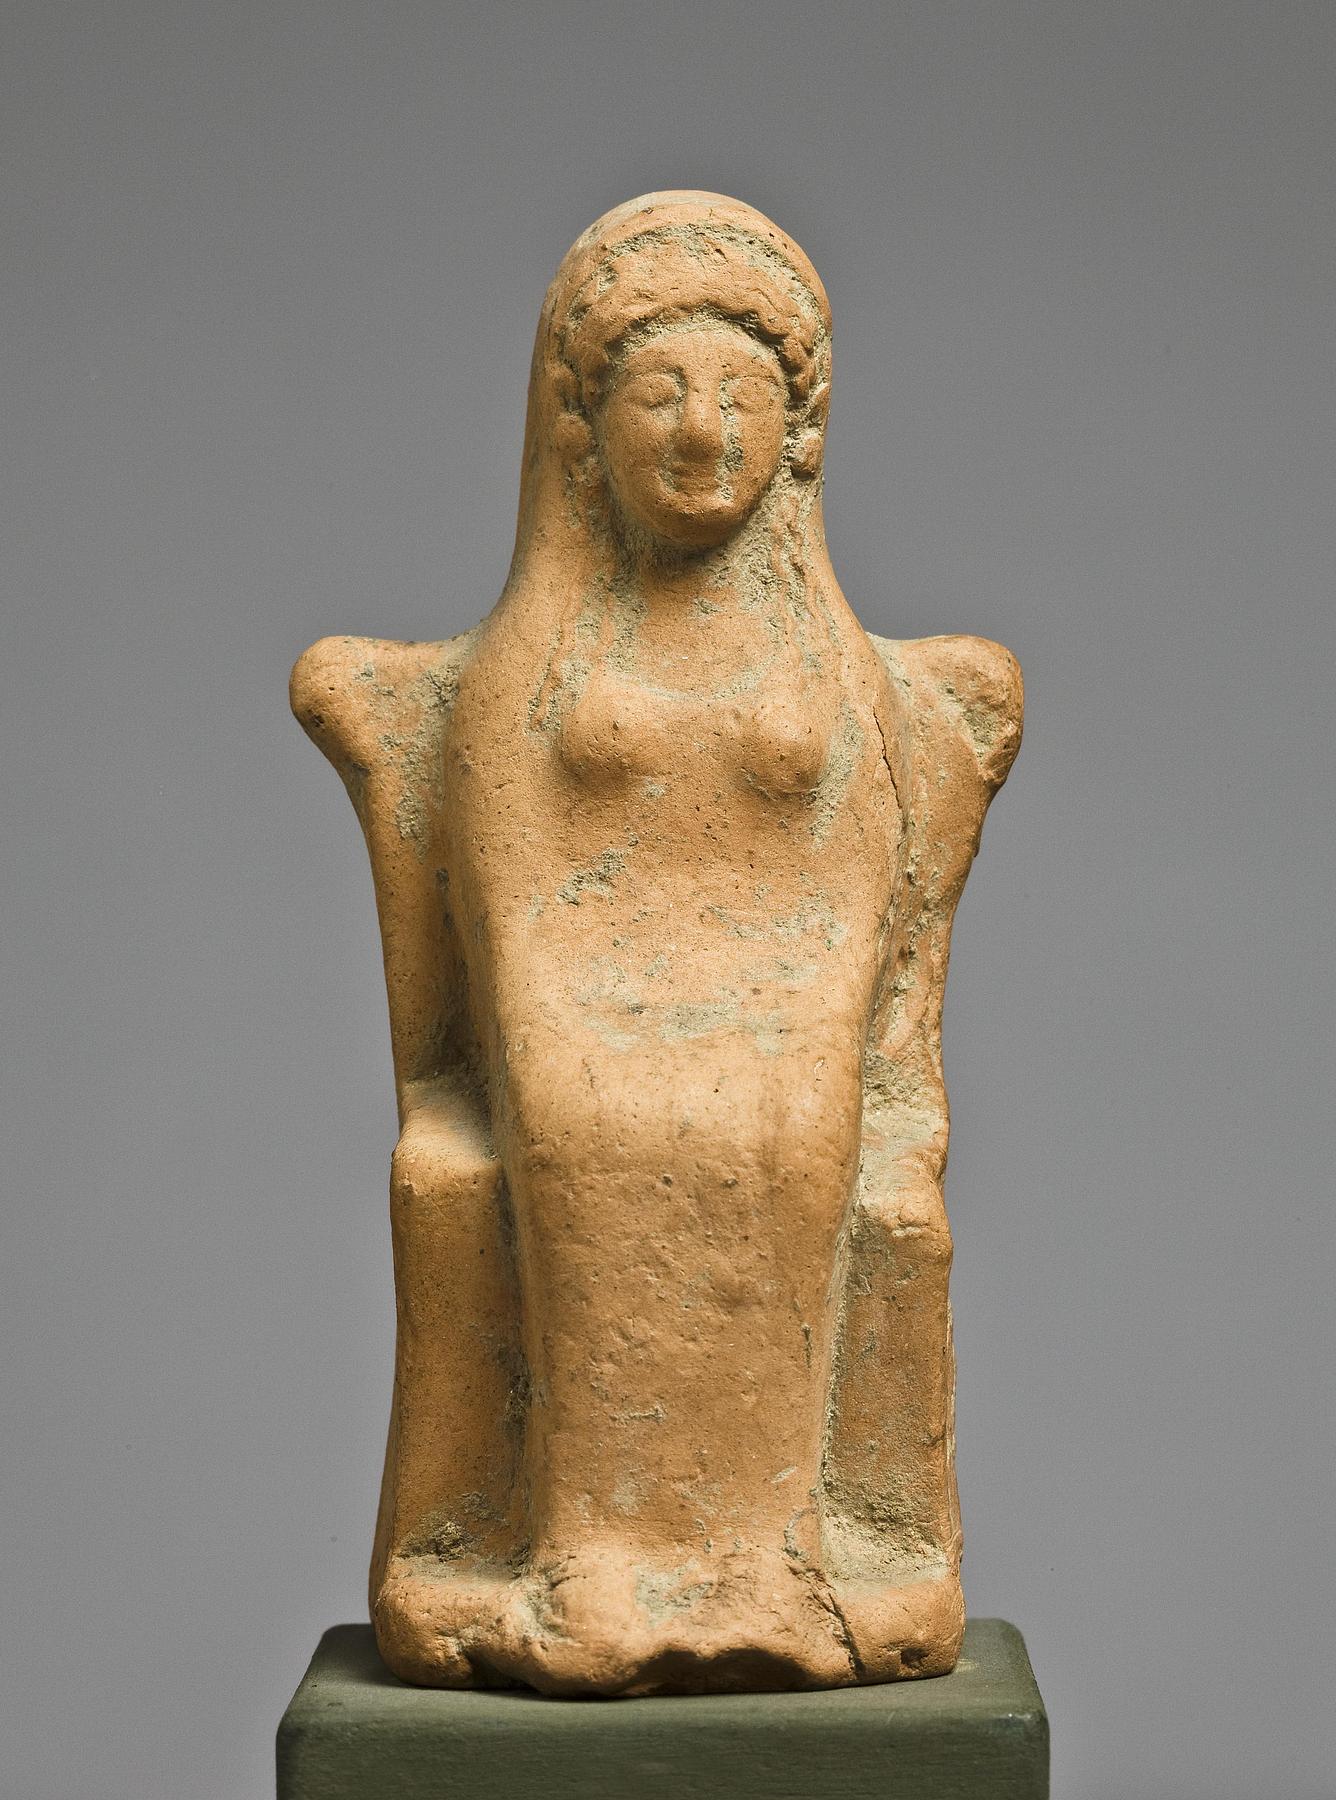 Statuette of a seated woman, H1002